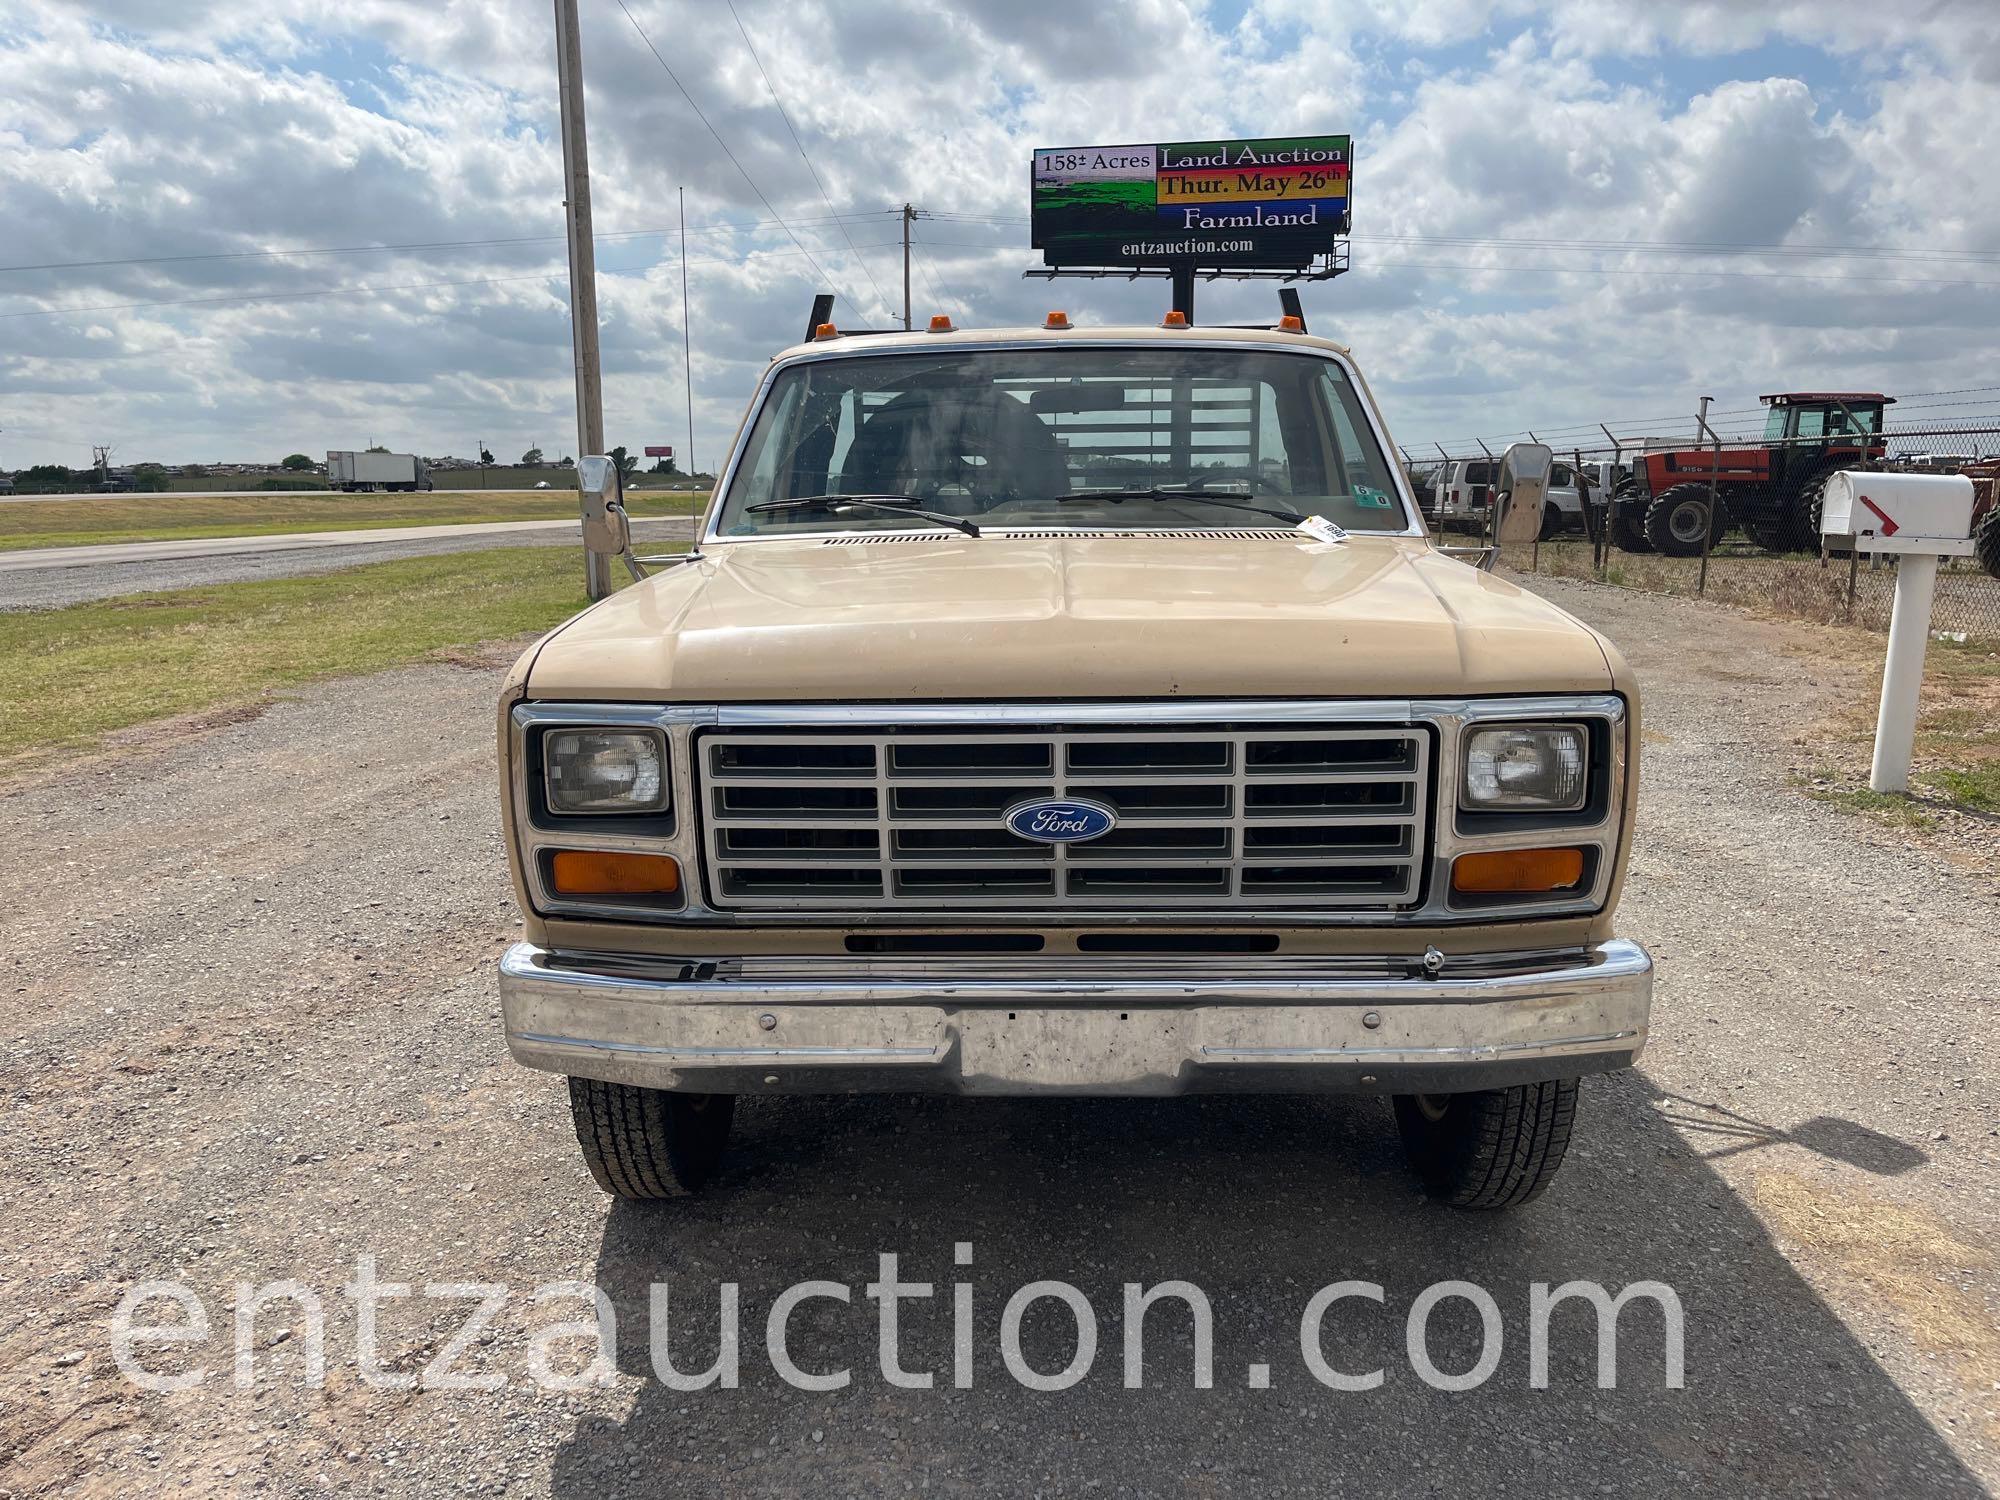 1983 FORD F350 PICKUP, 460 GAS, 4 SPEED, DUALLY,